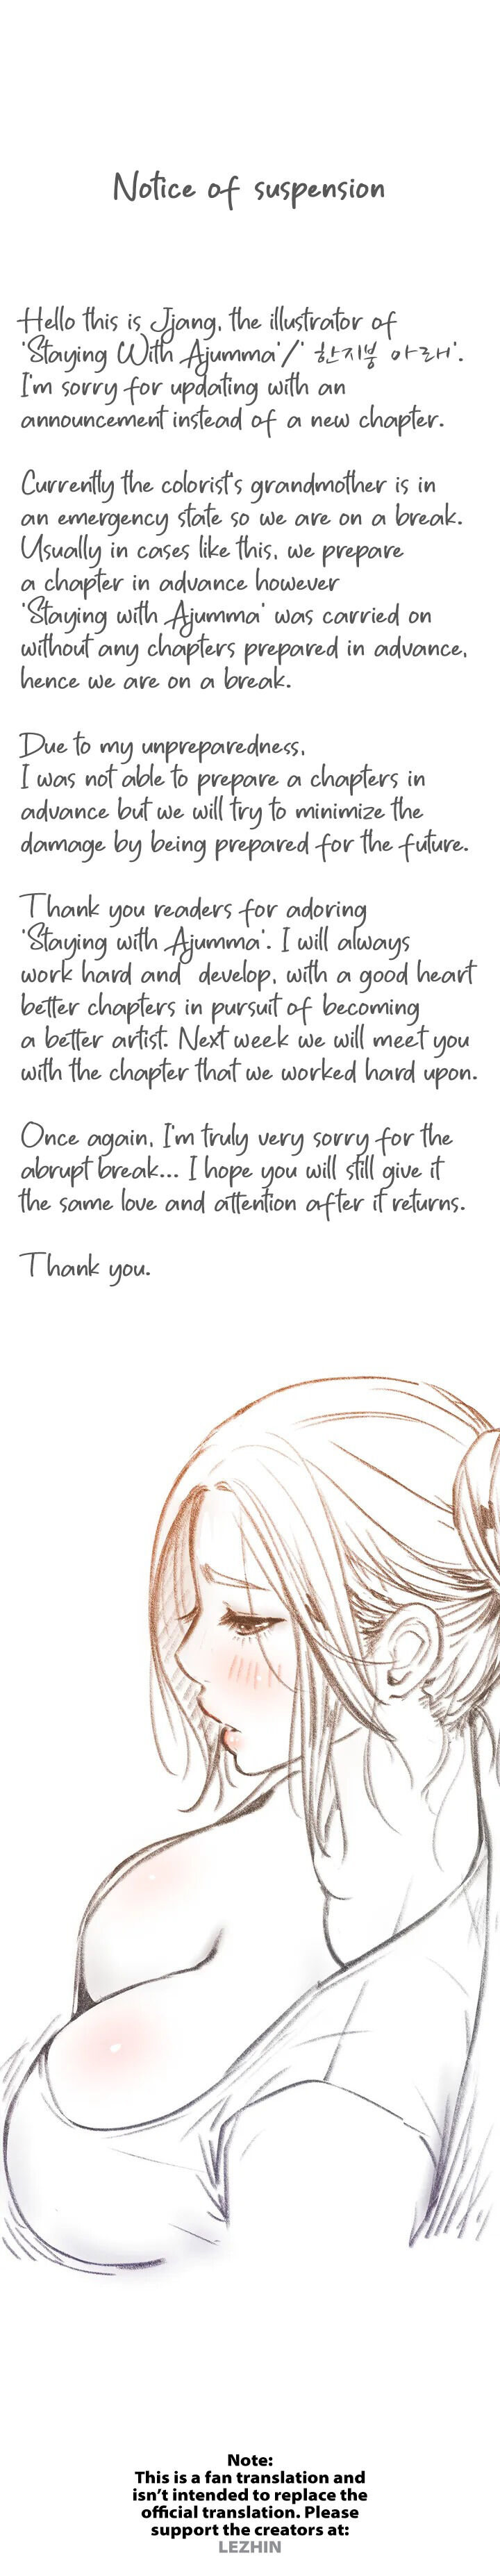 Staying with Ajumma - Chapter 16.5 Page 1